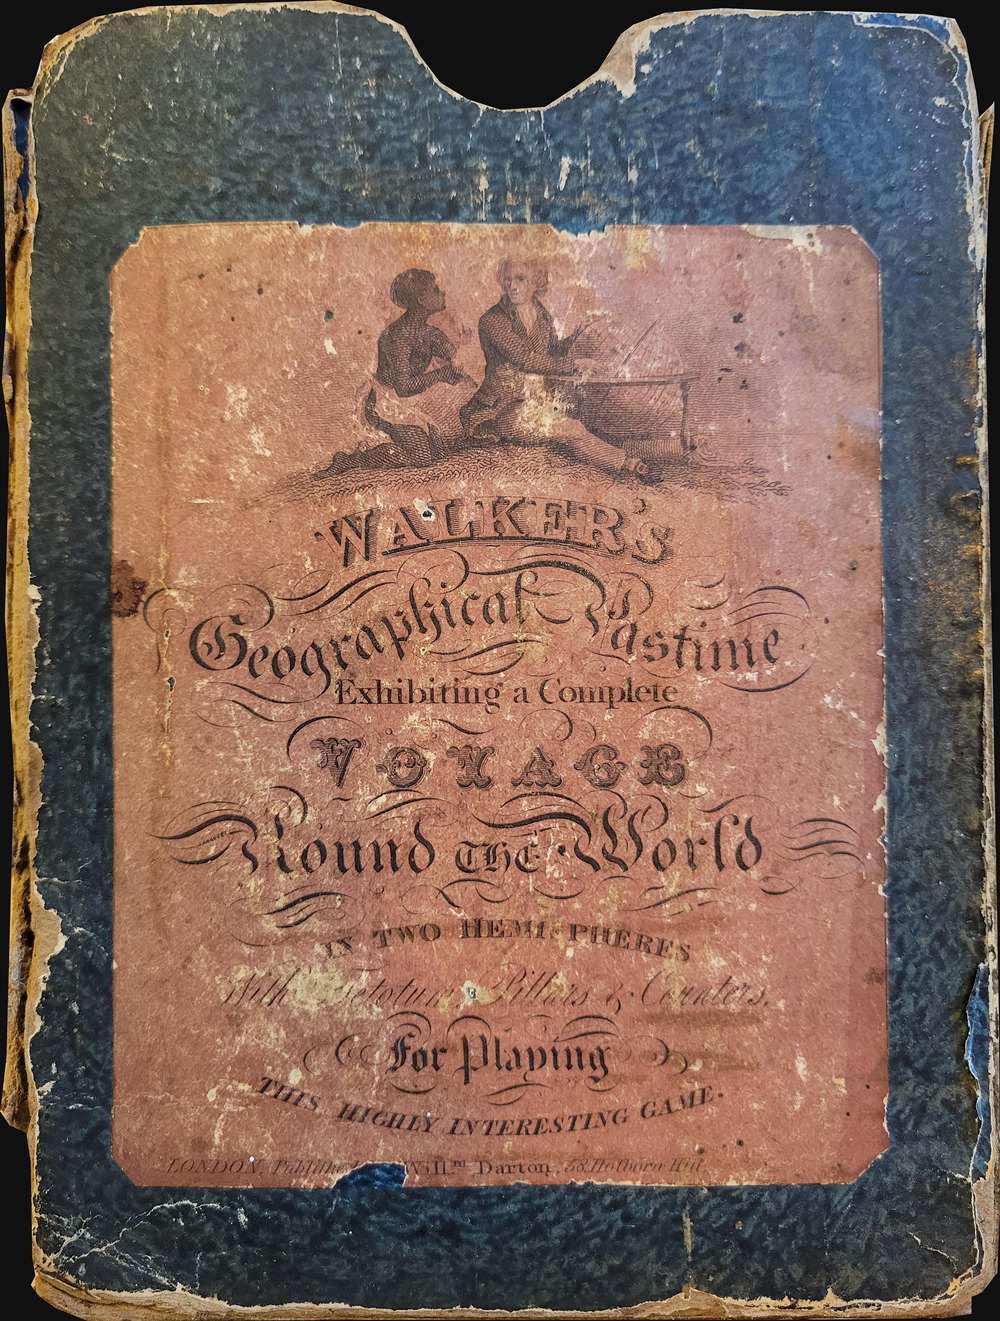 Walker's Geographical Pastime, or Tour Through the Western Hemisphere, or New World. An Amusing and Instructive Game. Walker's Geographical Pastime, or Tour Through the Eastern Hemisphere, or Old World. An Amusing and Instructive Game. - Alternate View 2